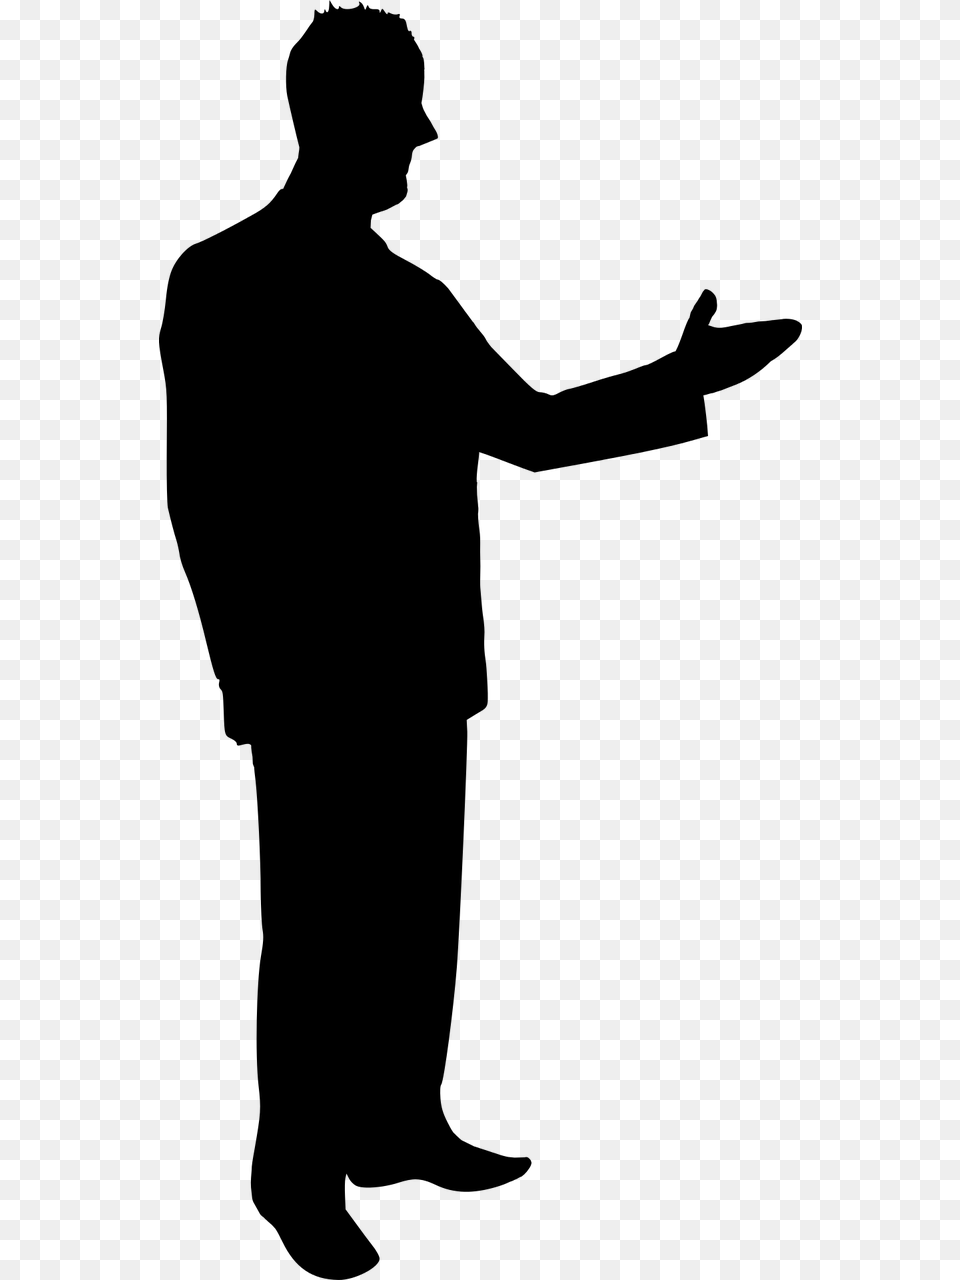 Silhouette Of A Preacher, Gray Png Image